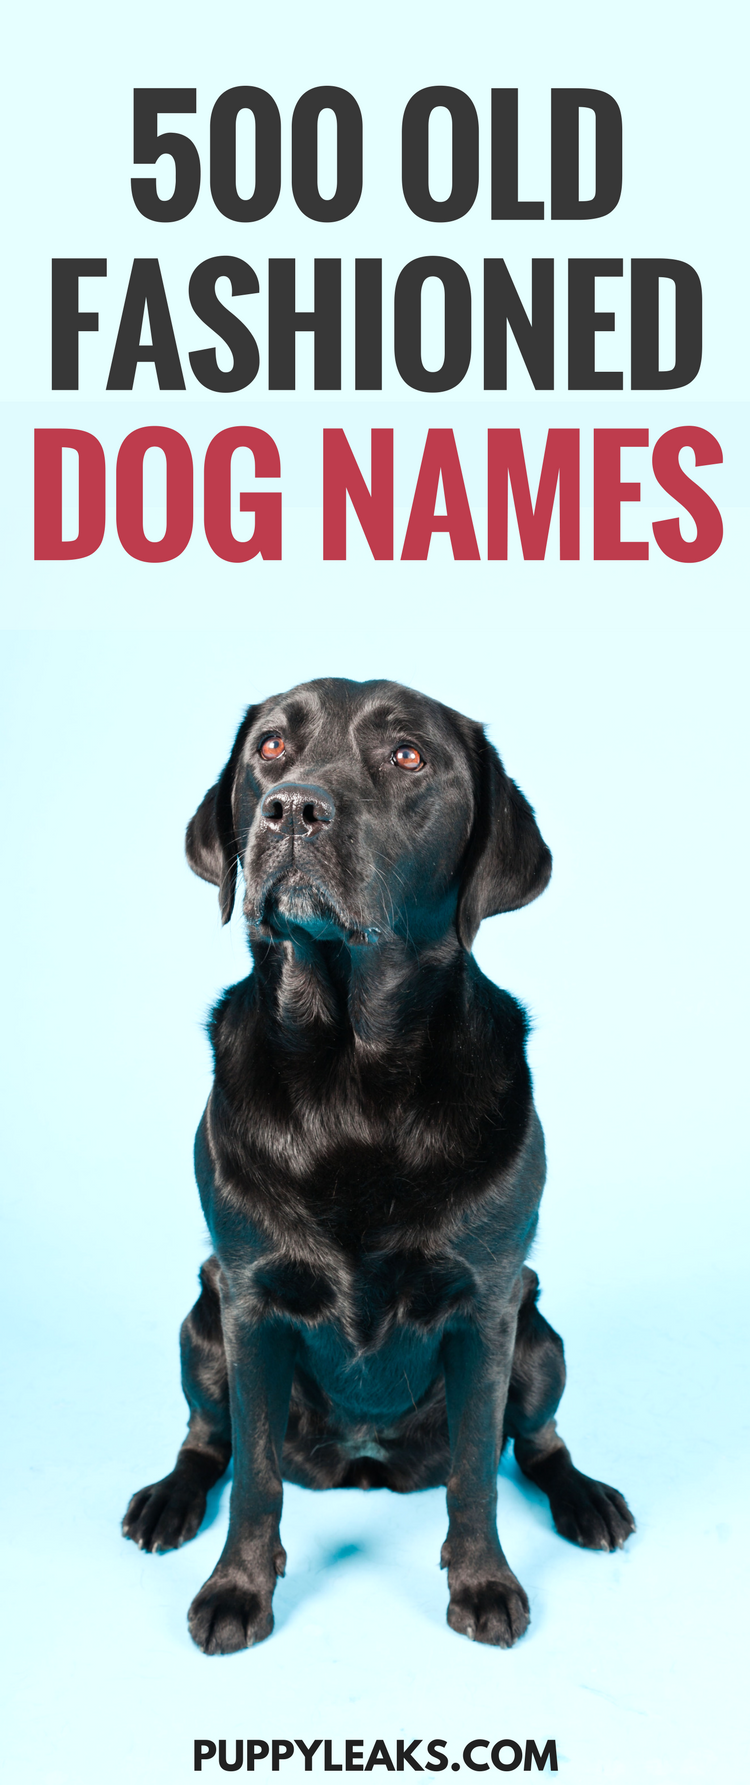 500 Old Fashioned Dog Names